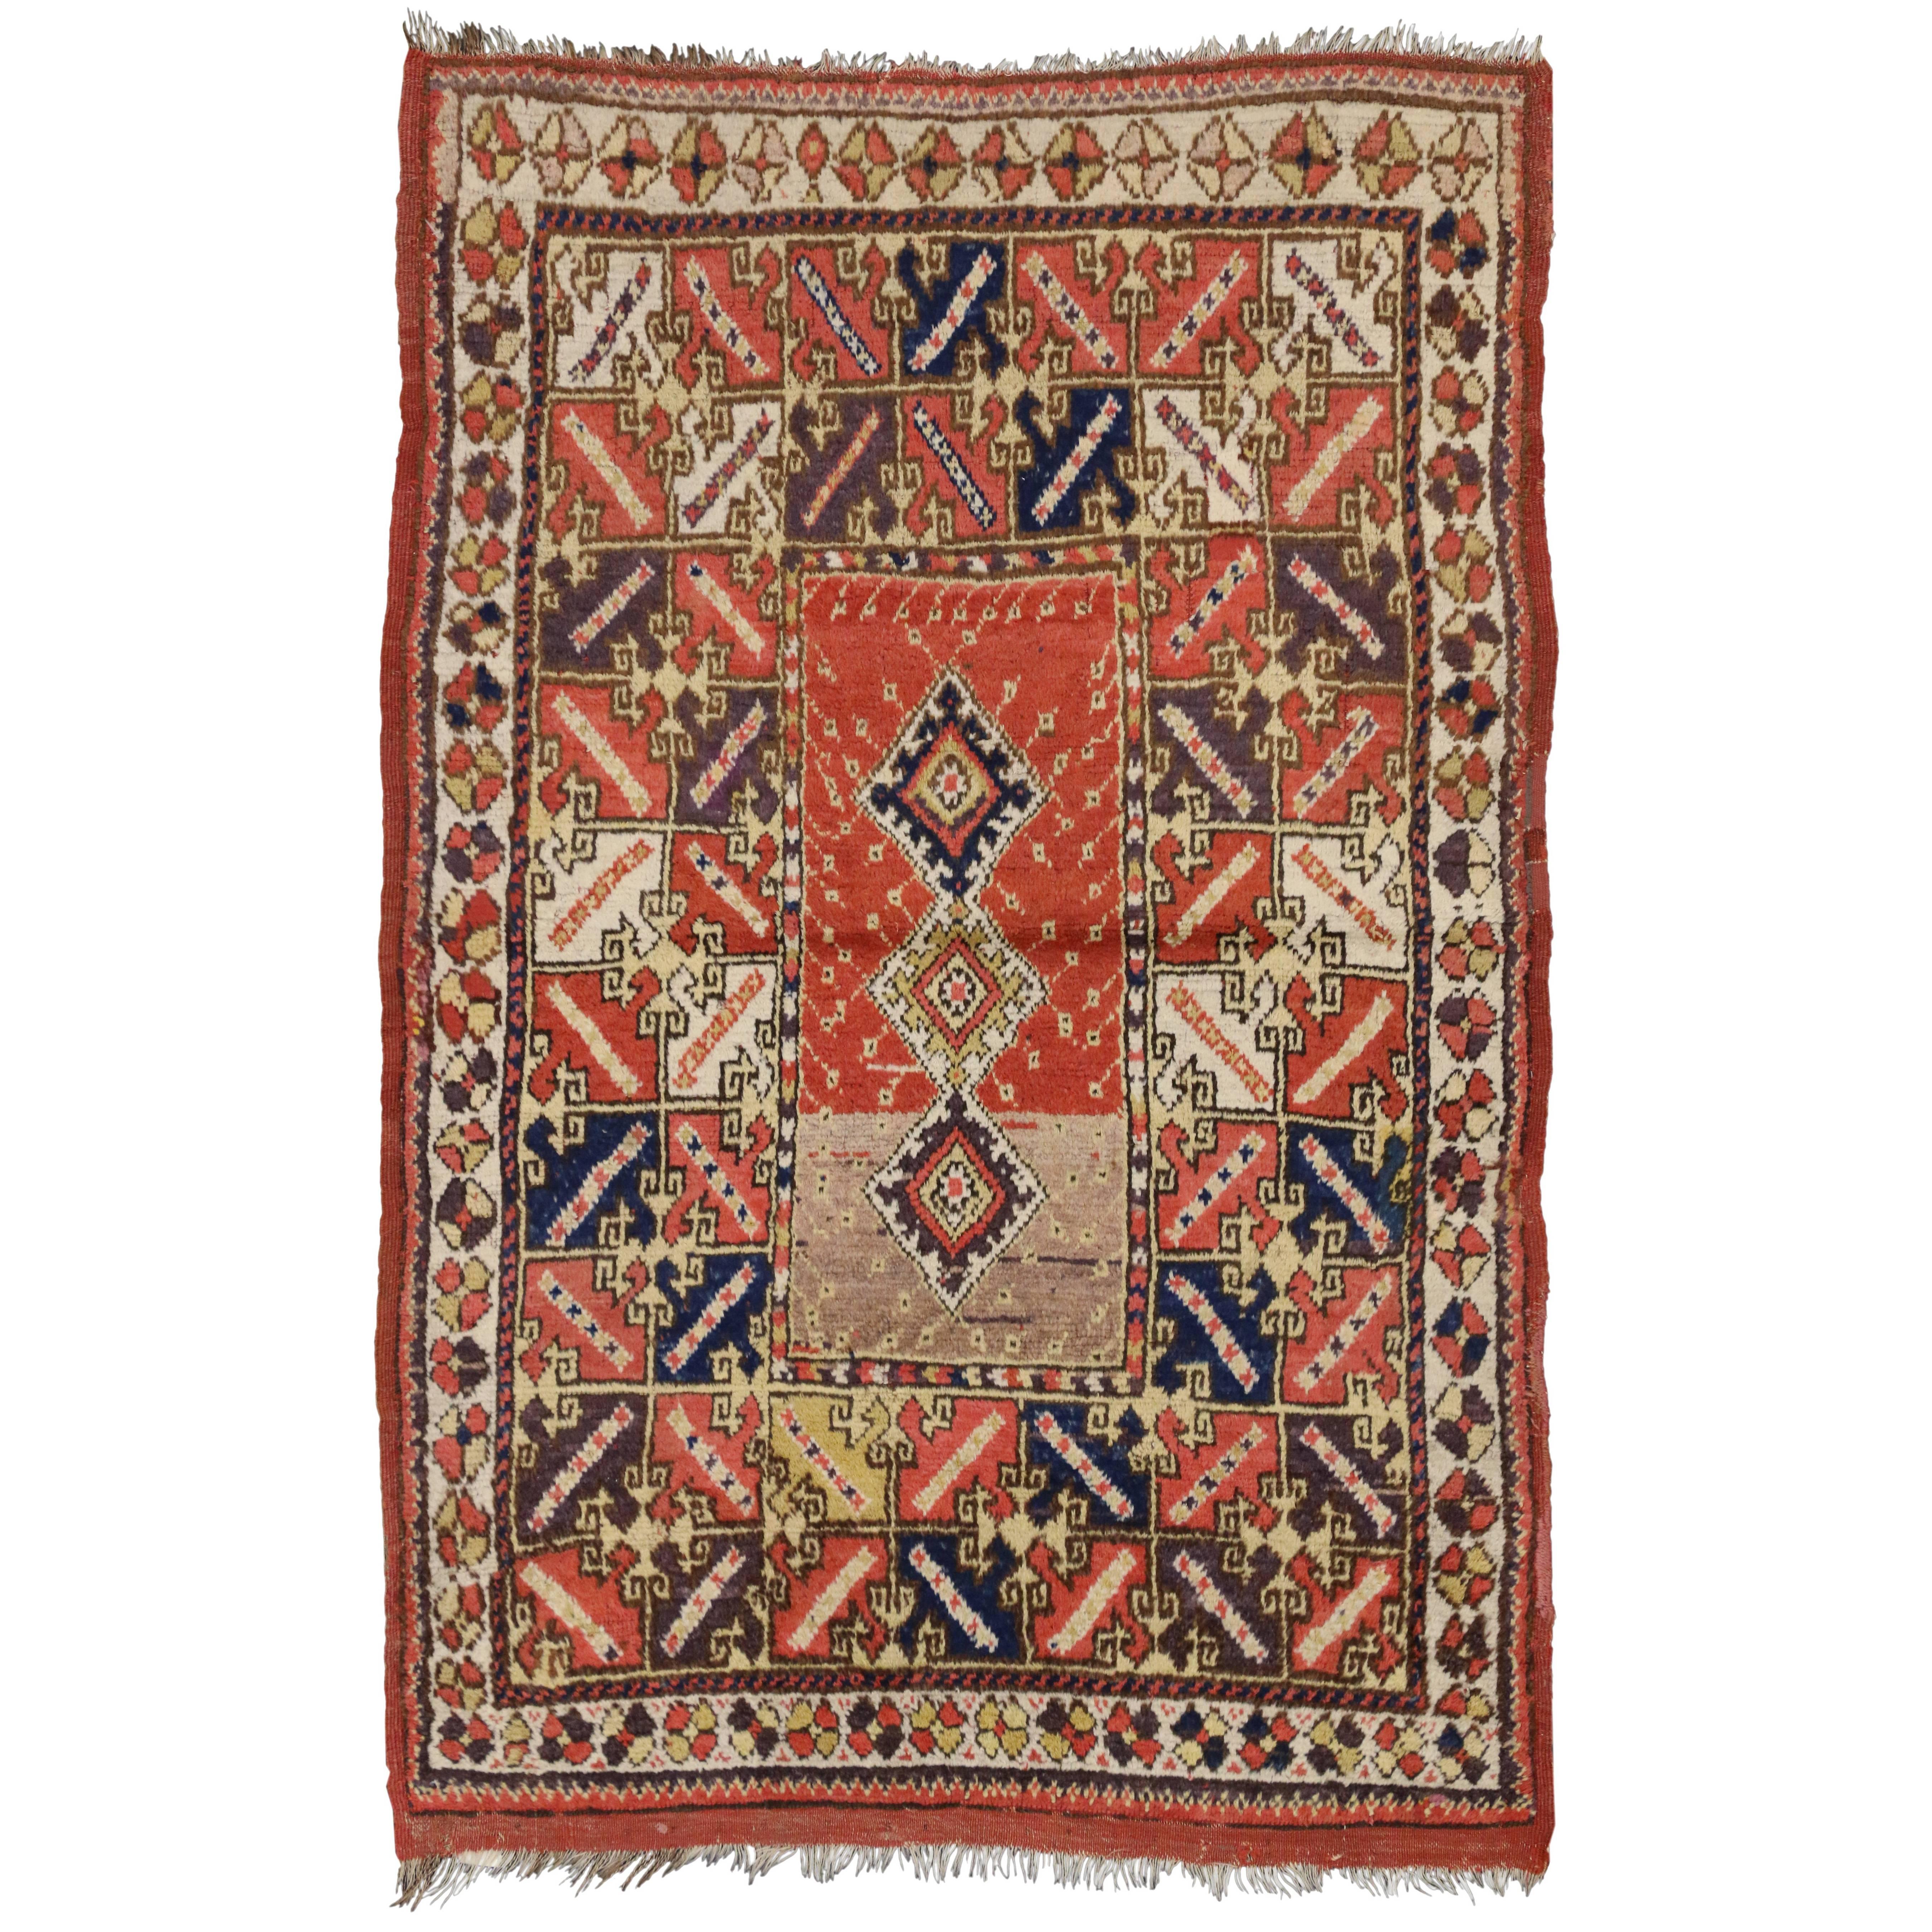 Antique Turkish Accent Rug with Modern Tribal Style, Kitchen, Foyer or Entry Rug